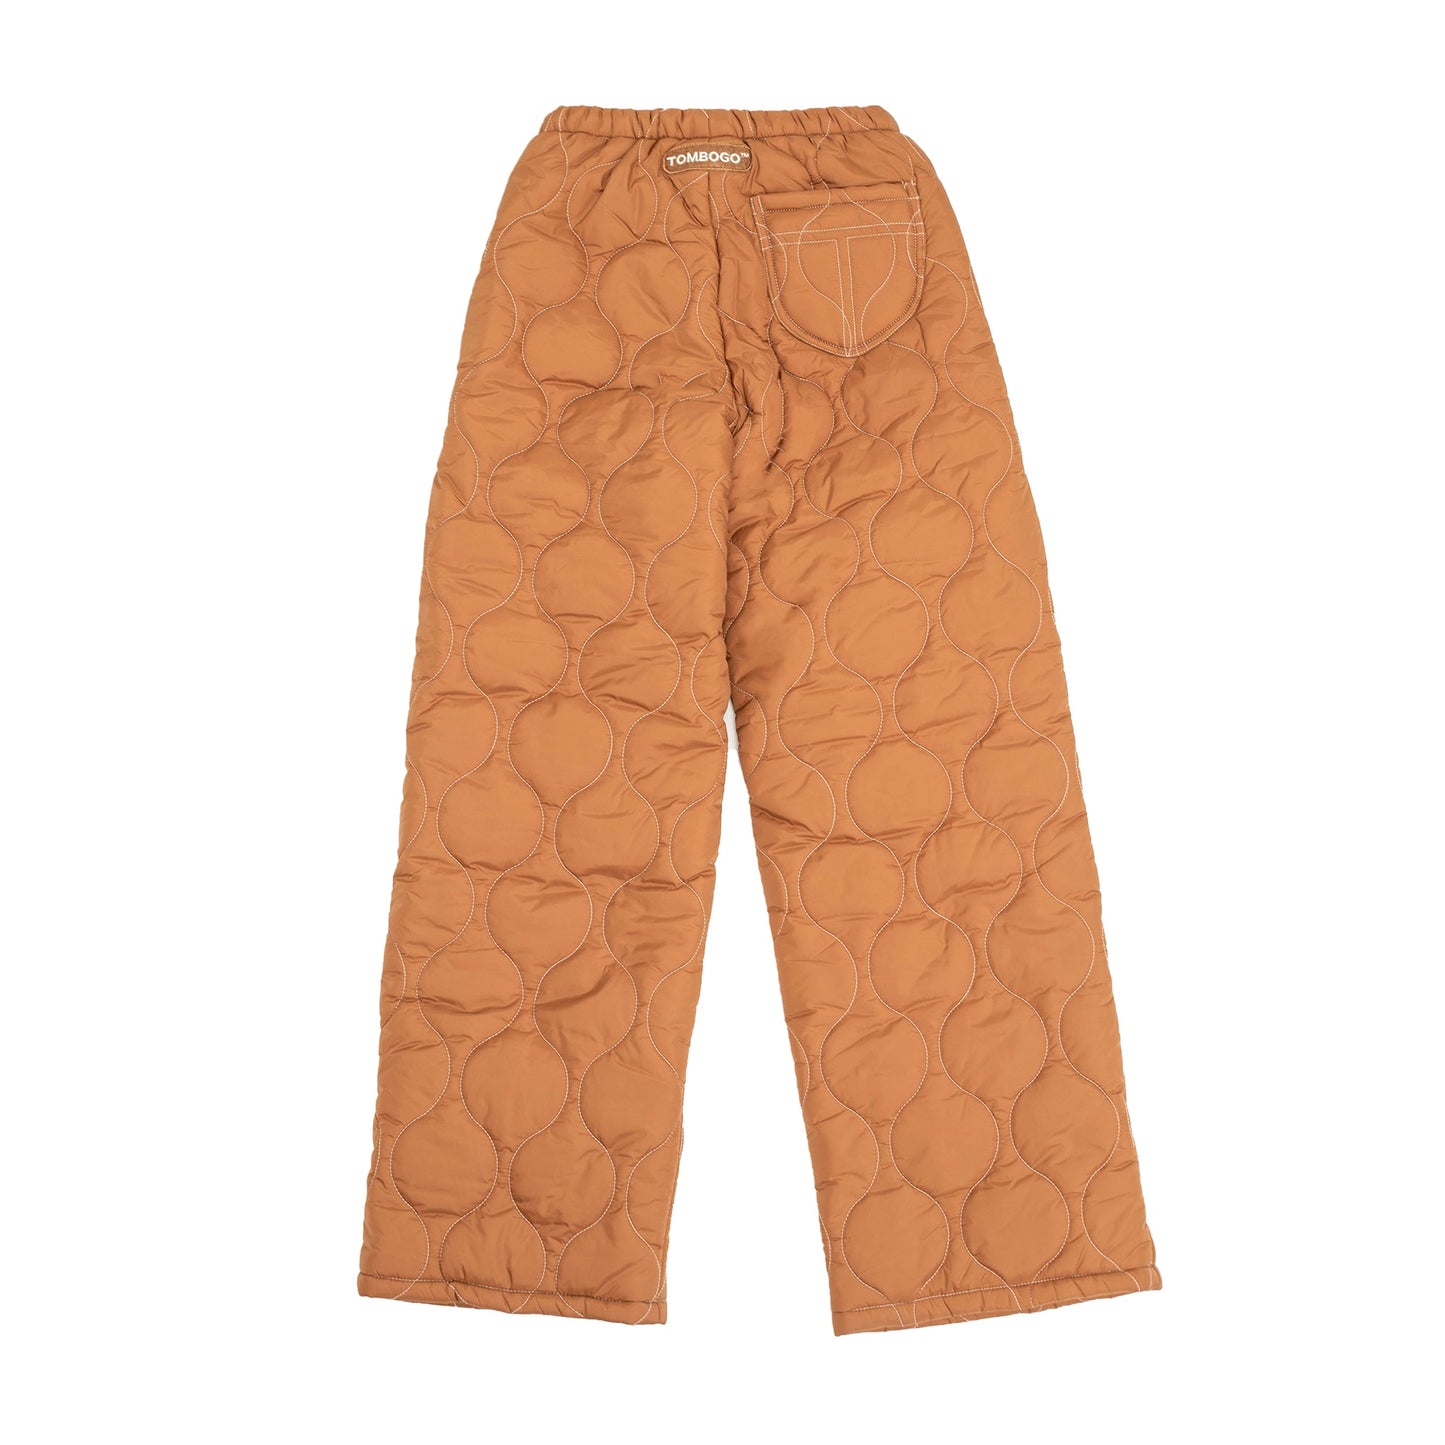 DOUBLE KNEE QUILTED LINER PANTS